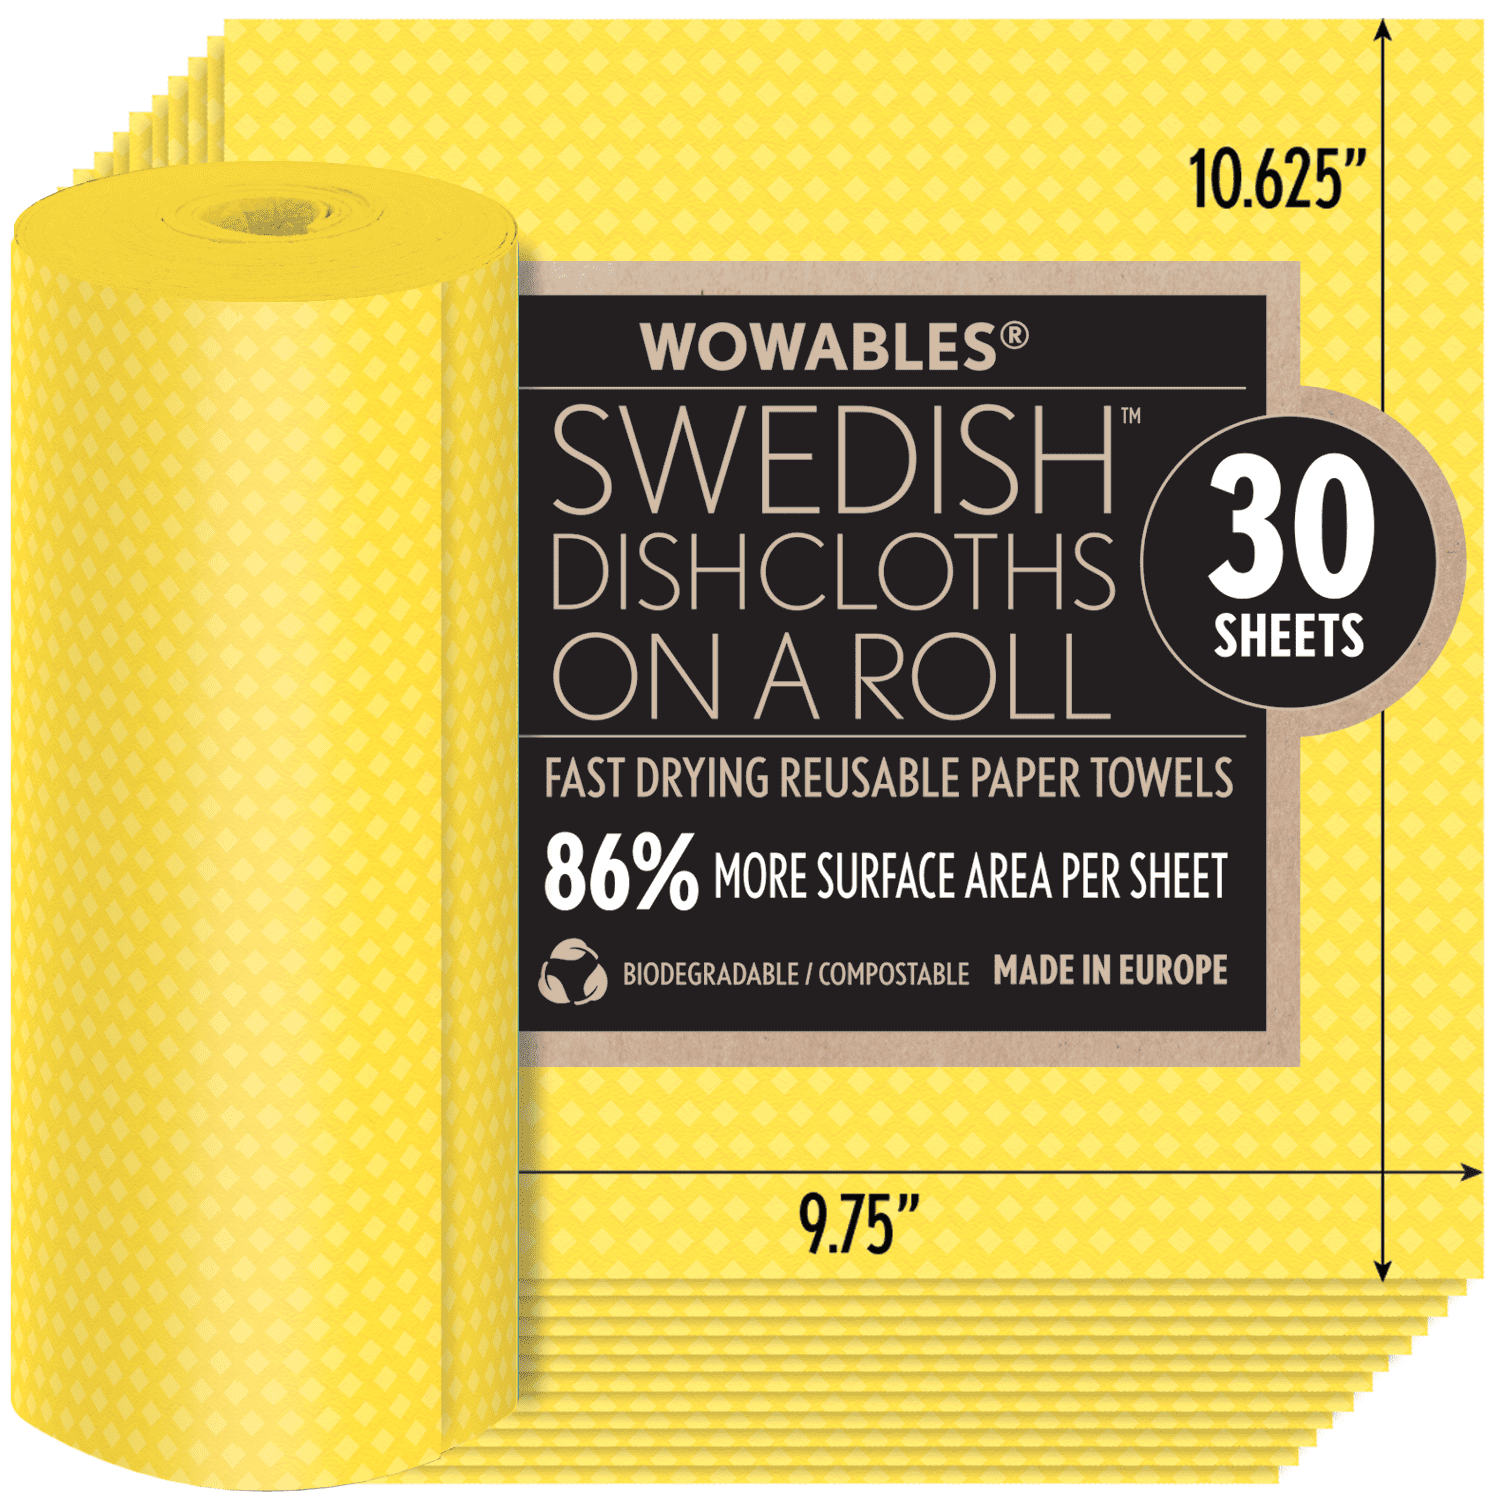 Swap Your Paper Towels For A Pack Of Swedish Dishcloths At 20% Off